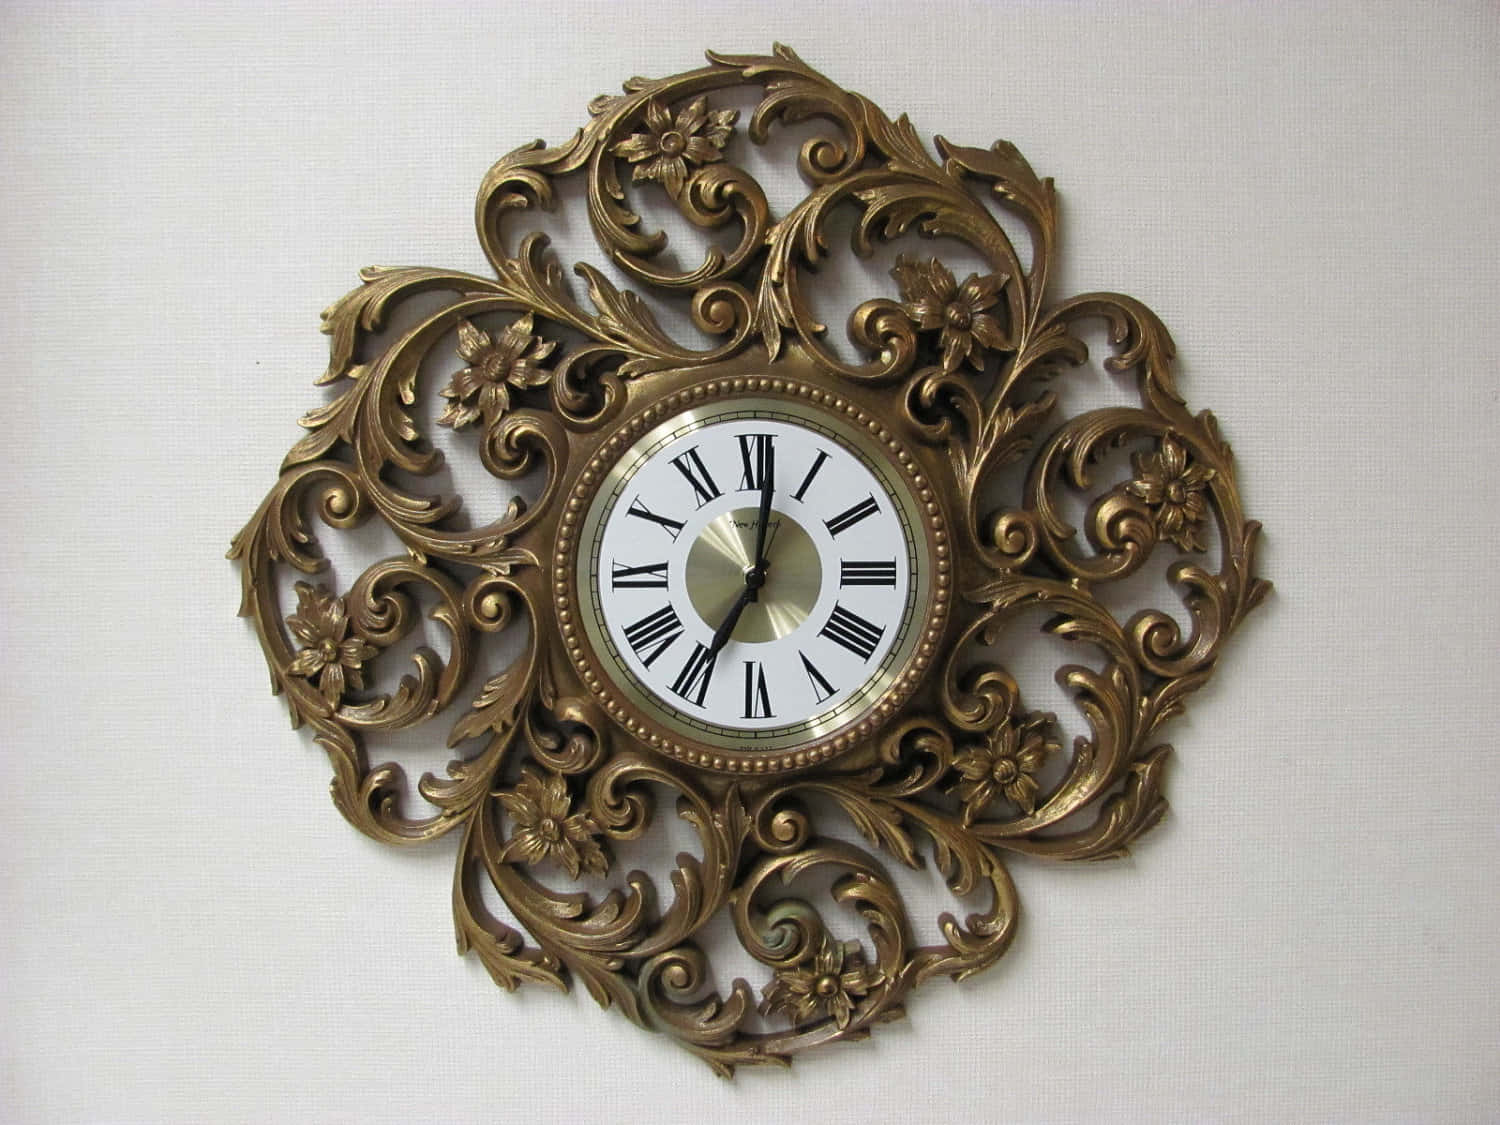 A Large Ornate Clock On A Wall